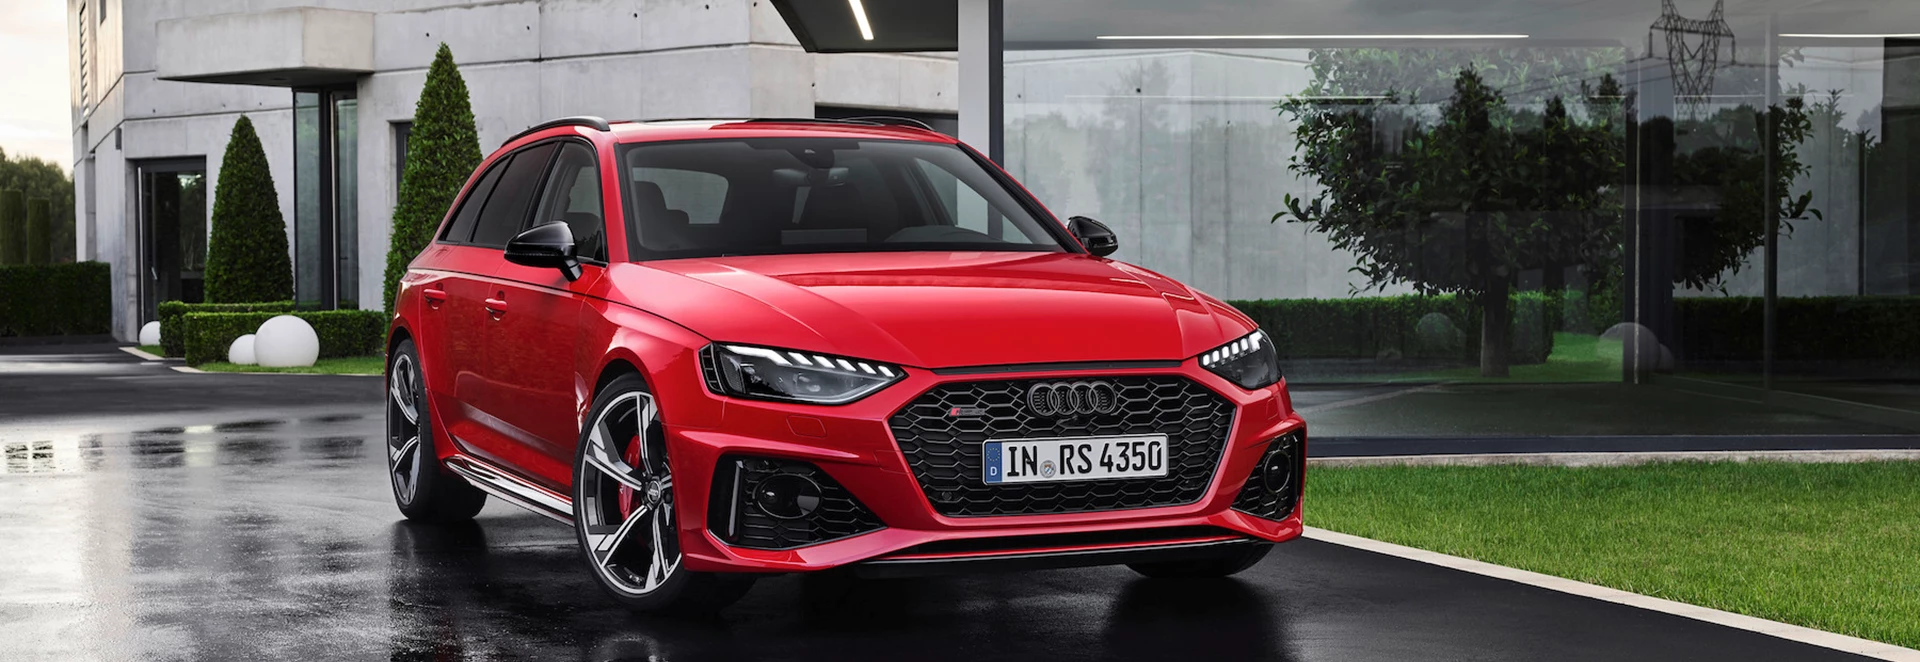 Facelifted 2020 Audi RS4 unveiled